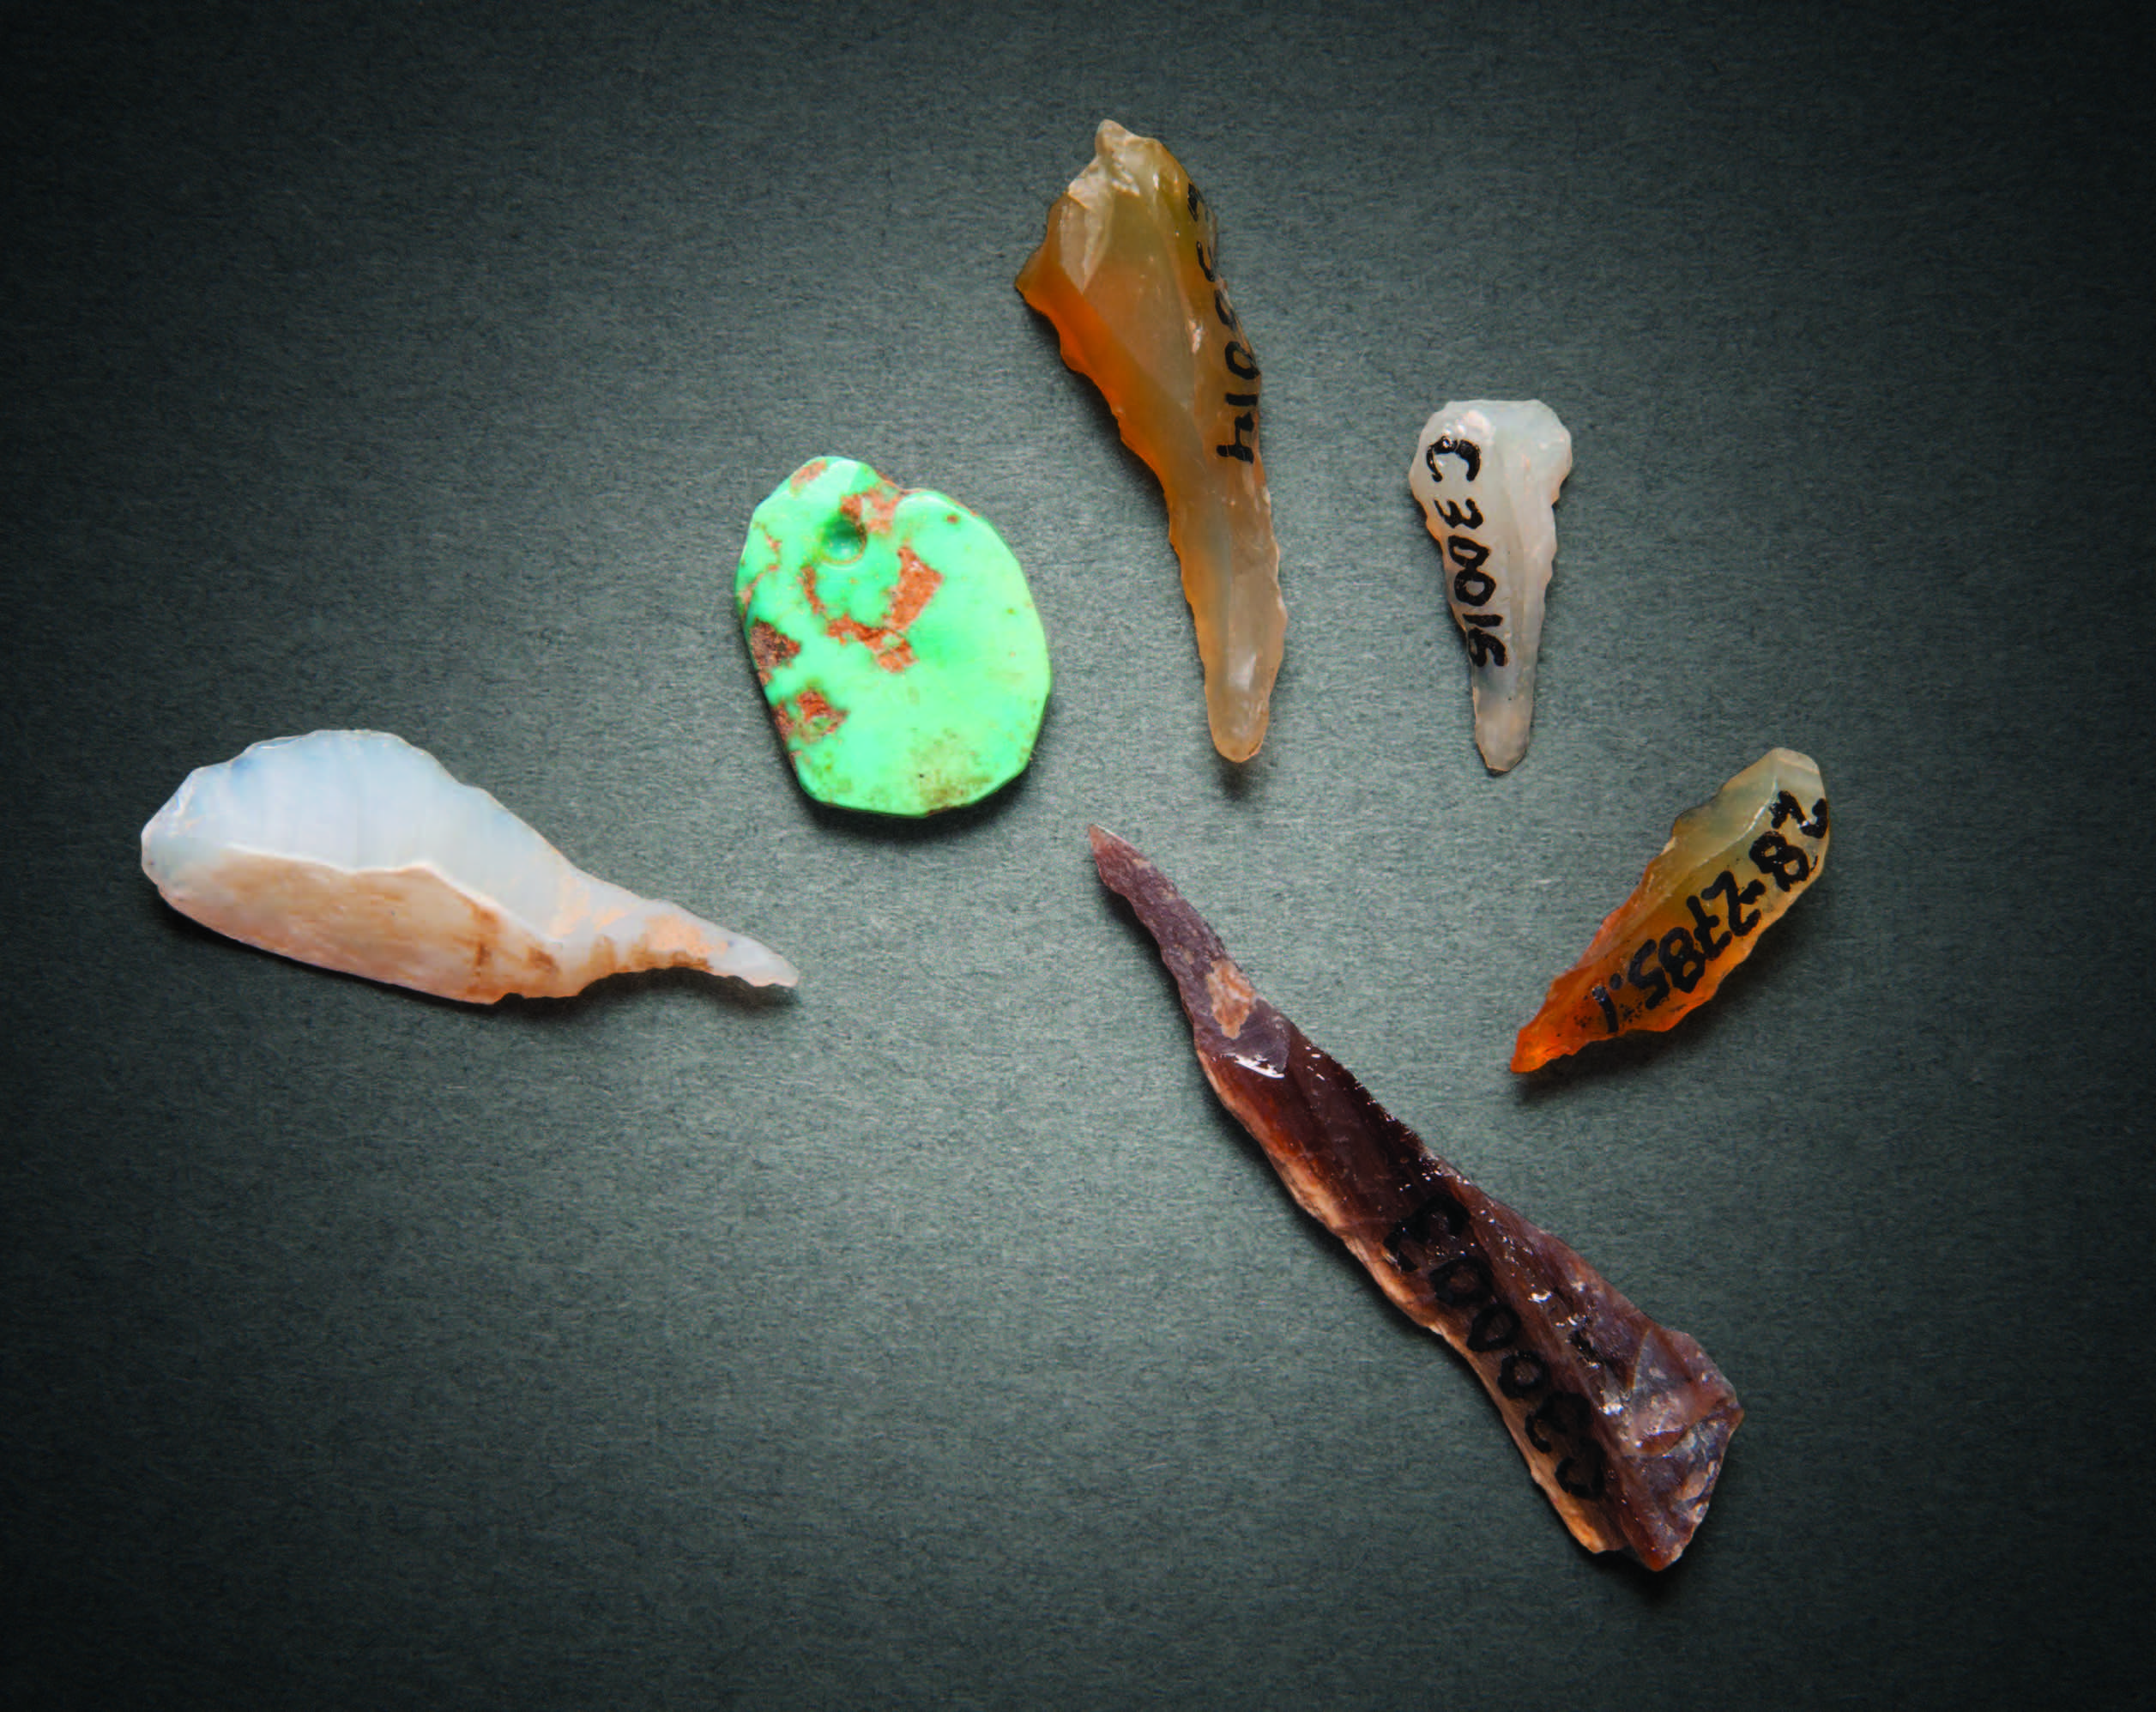 A partially drilled turquoise pendant with drilling tools. Courtesy Chaco Culture National Historical Park, Museum Collection Catalog Nos. 30391, 3003, 30016, 30004, 30014, Hibben Center at the University of New Mexico. Photograph by Blair Clark.